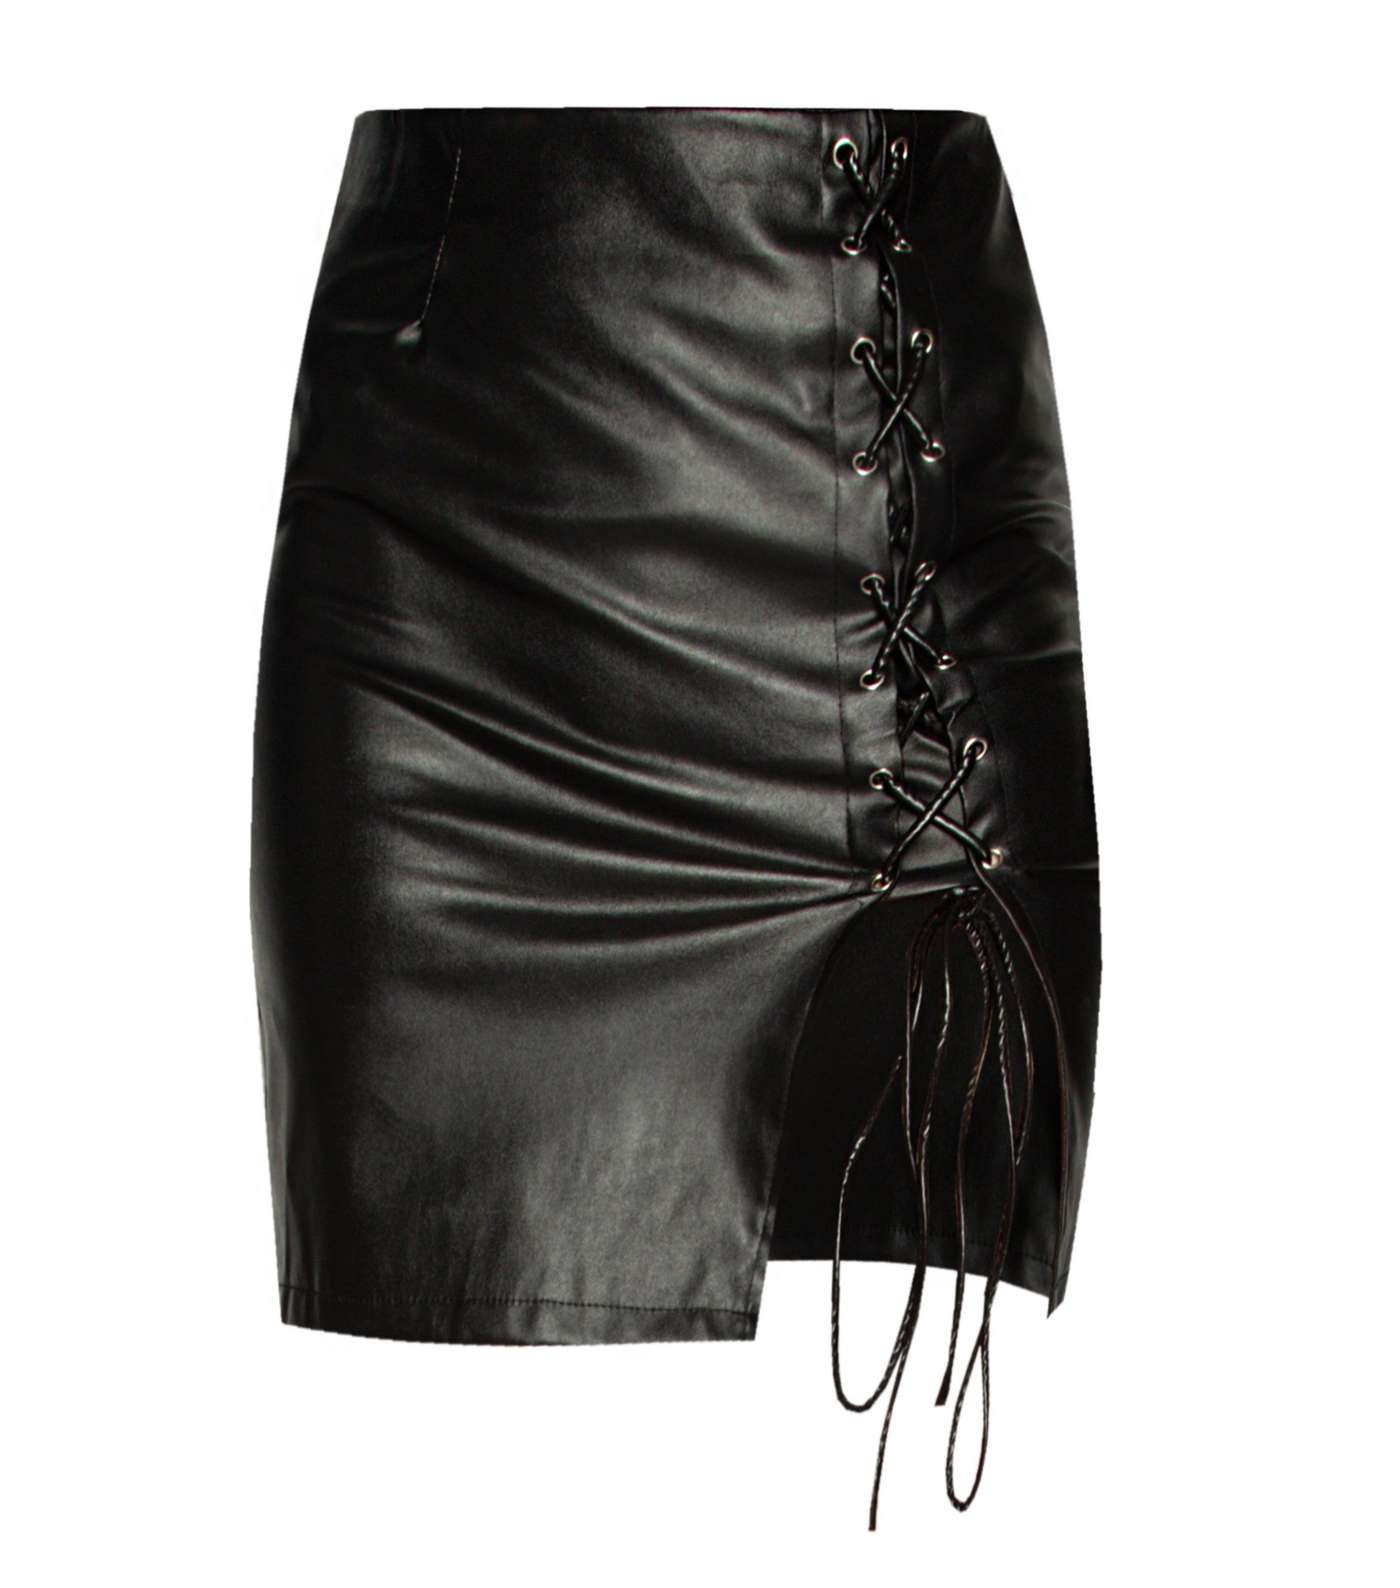 21st Mill Black Leather-Look Lace Up Skirt Image 4